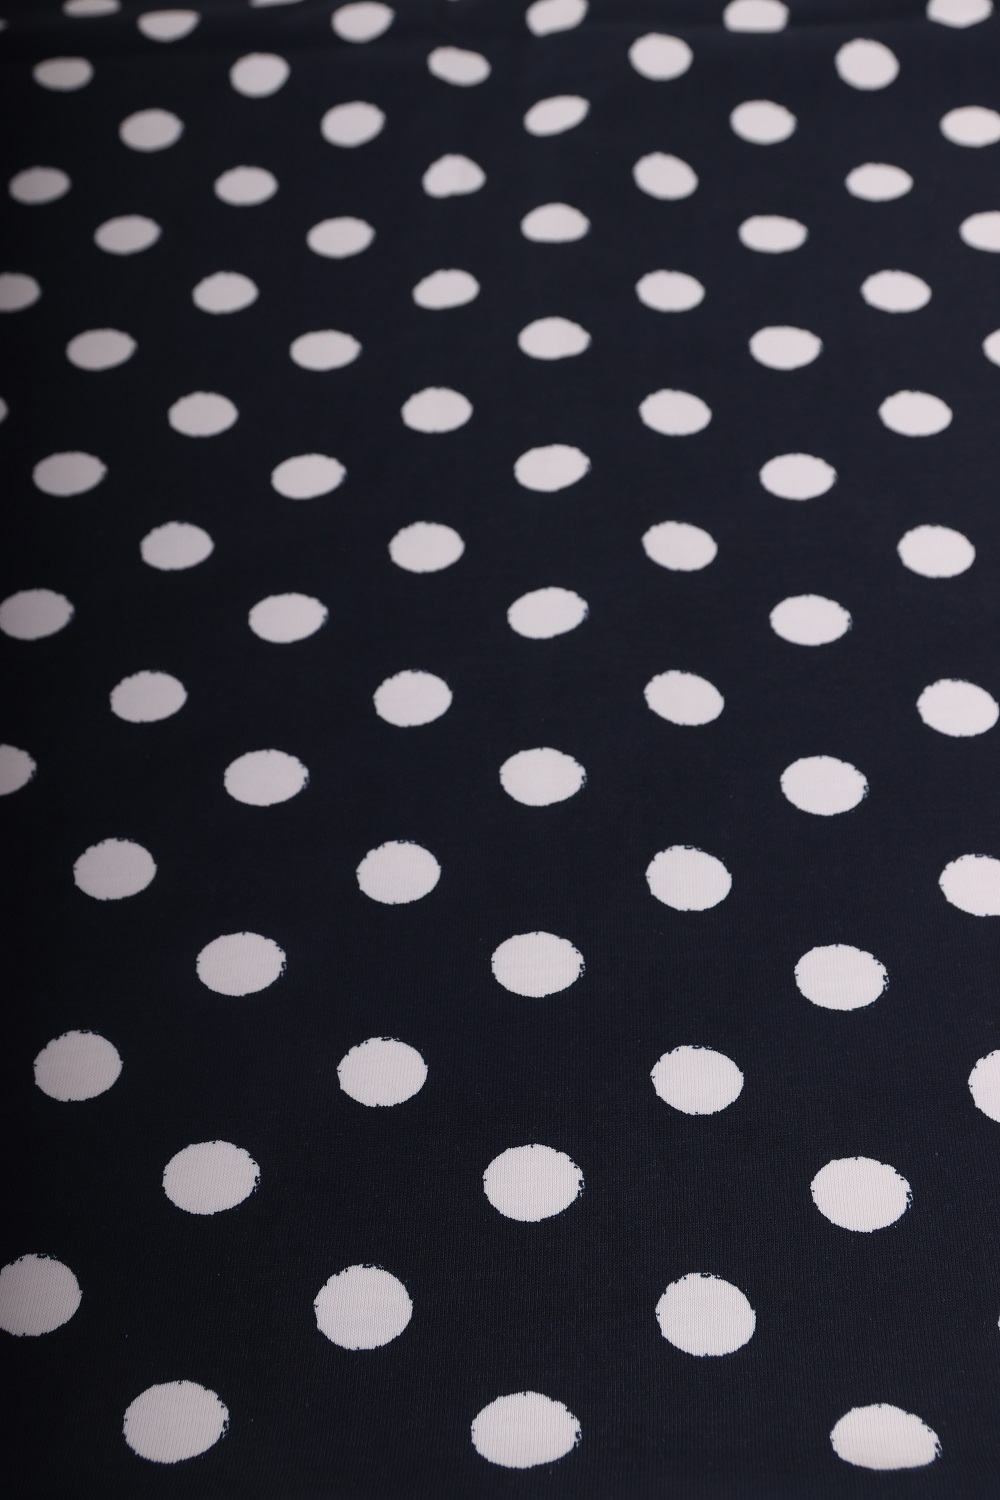 Cotton single jersey with elastane, 1 meter, 185gr/m2, blue with polka dots